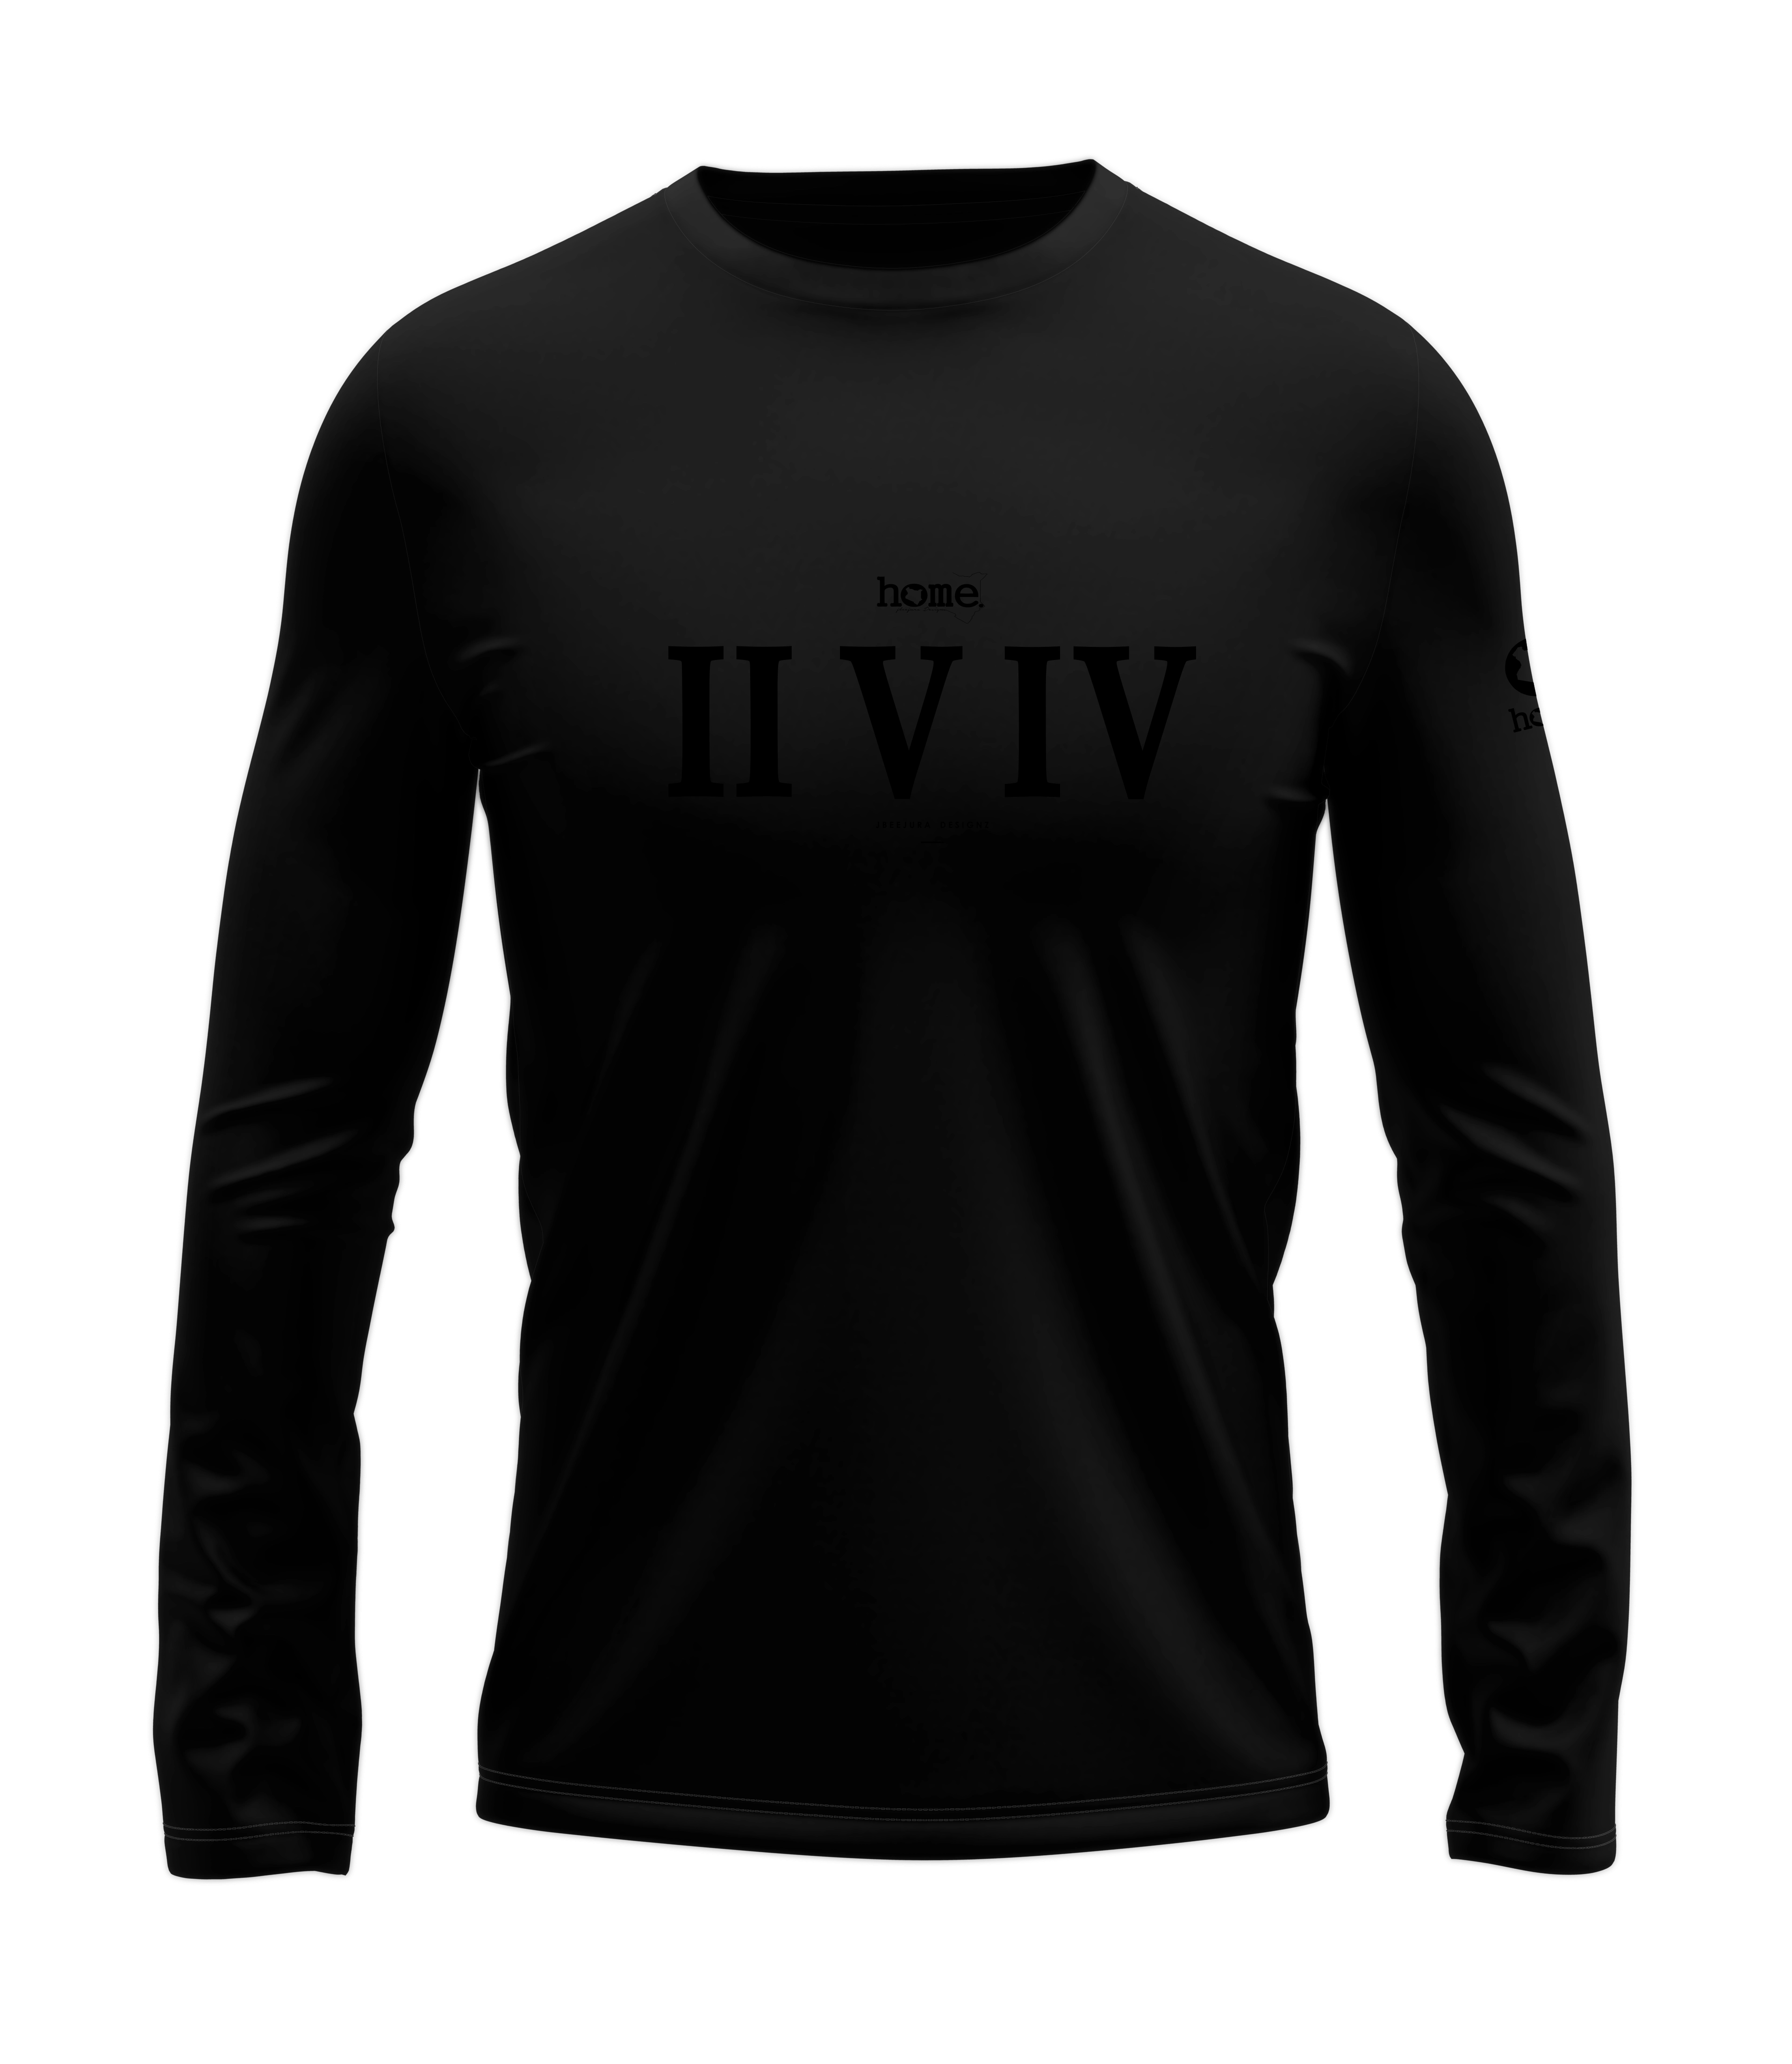 home_254 LONG-SLEEVED BLACK T-SHIRT WITH A BLACK ROMAN NUMERALS PRINT – COTTON PLUS FABRIC